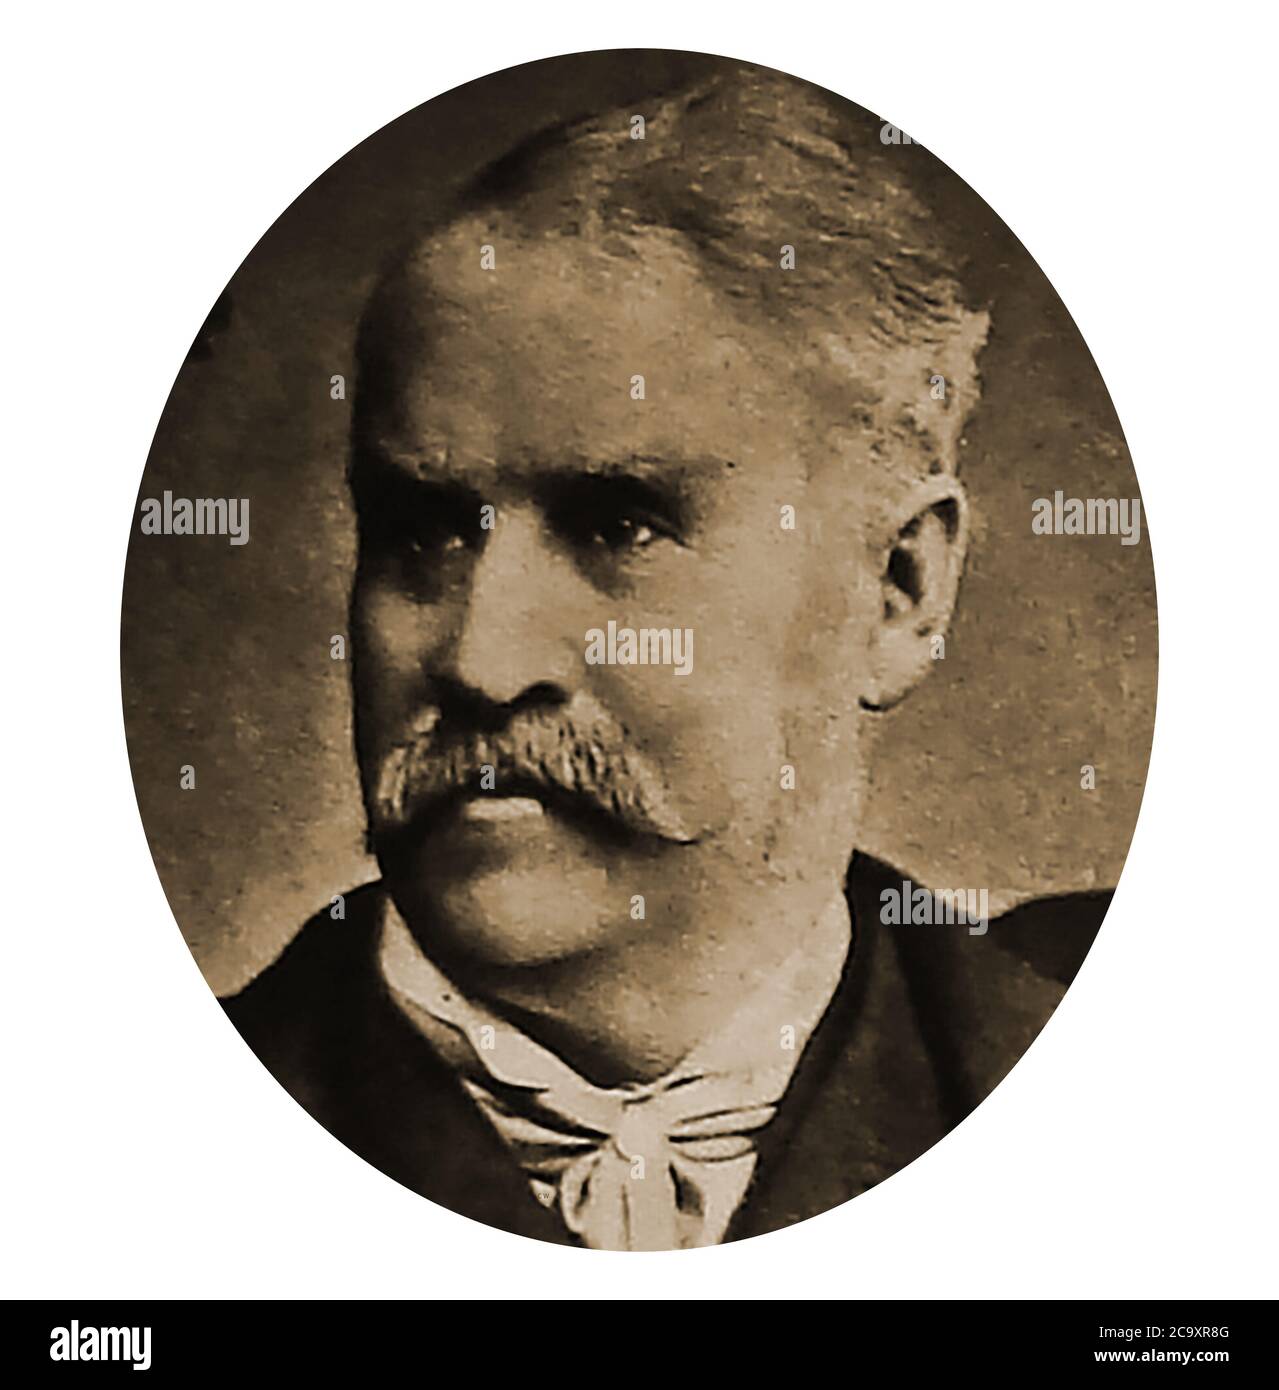 Portrait of Sir William Schwenk Gilbert - One of the cooperative partnership Gilbert and Sullivan between dramatist William Schwenk Gilbert (1836–1911) and the composer Arthur Sullivan (1842–1900) . The two men collaborated on fourteen comic operas between 1871 and 1896, including The Pirates of Penzance, H.M.S. Pinafore and The Mikado  . Stock Photo